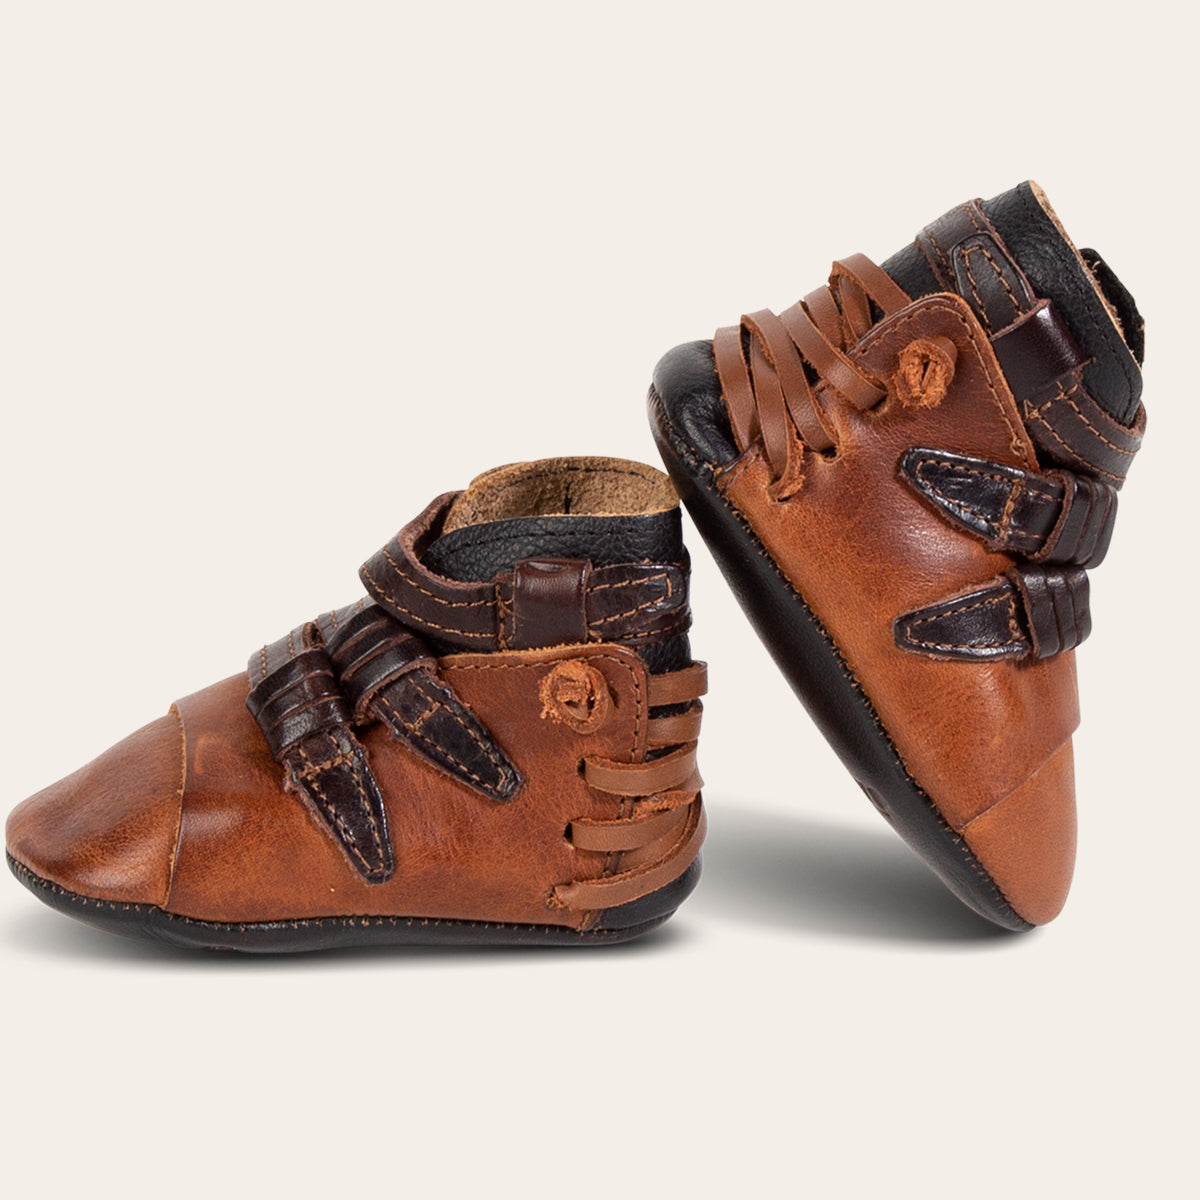 side view showing contrasting back lace and side strap detailing on FREEBIRD infant baby crue cognac leather bootie